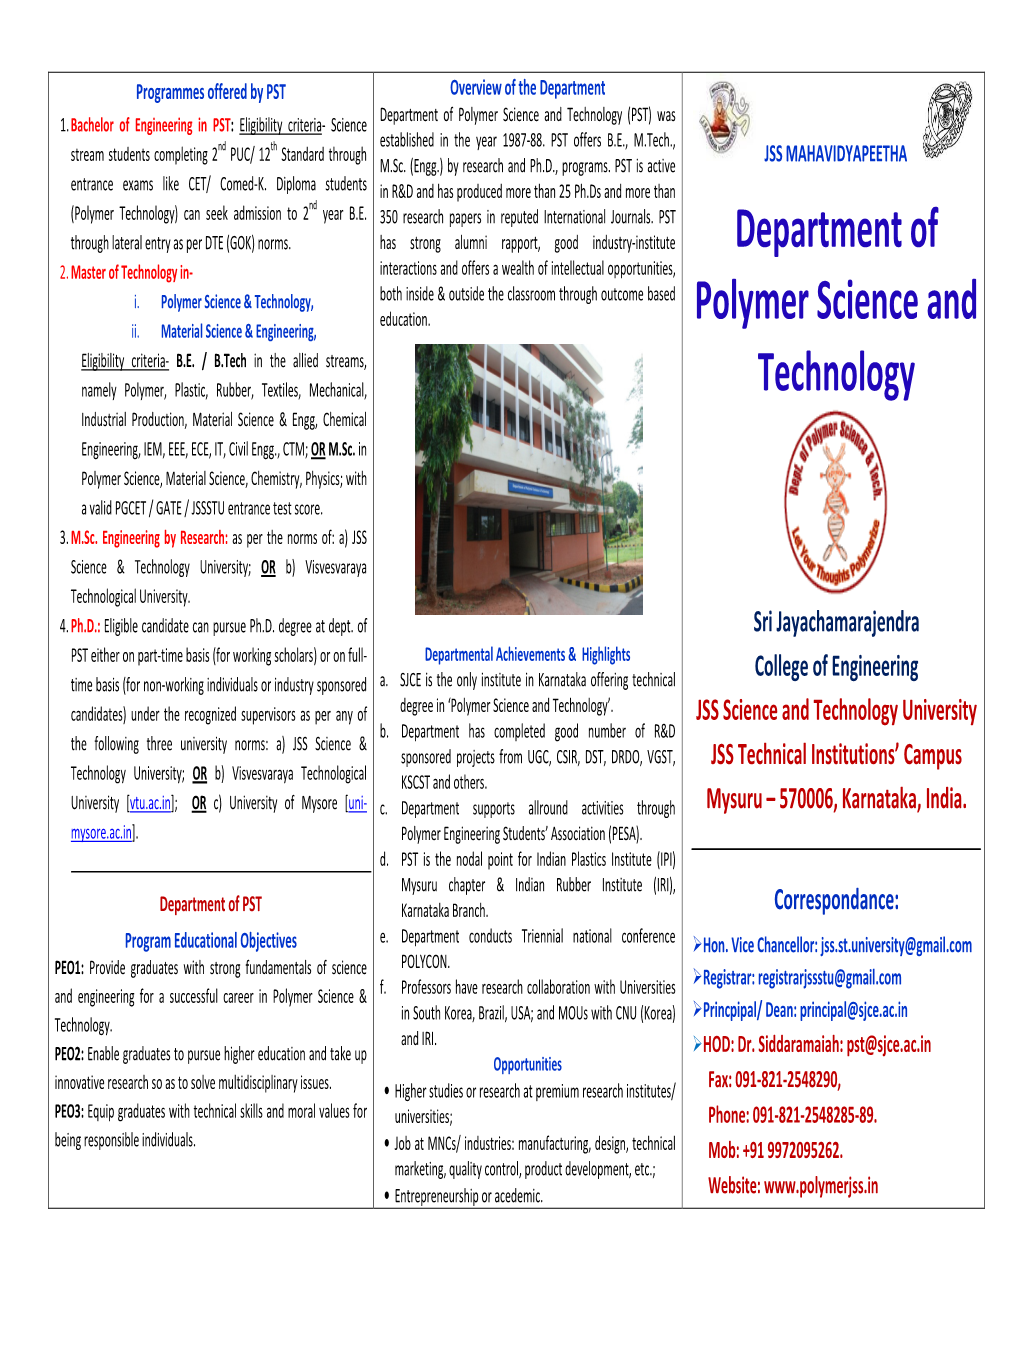 Department of Polymer Science and Technology (PST) Was Established in the Year 1987-88